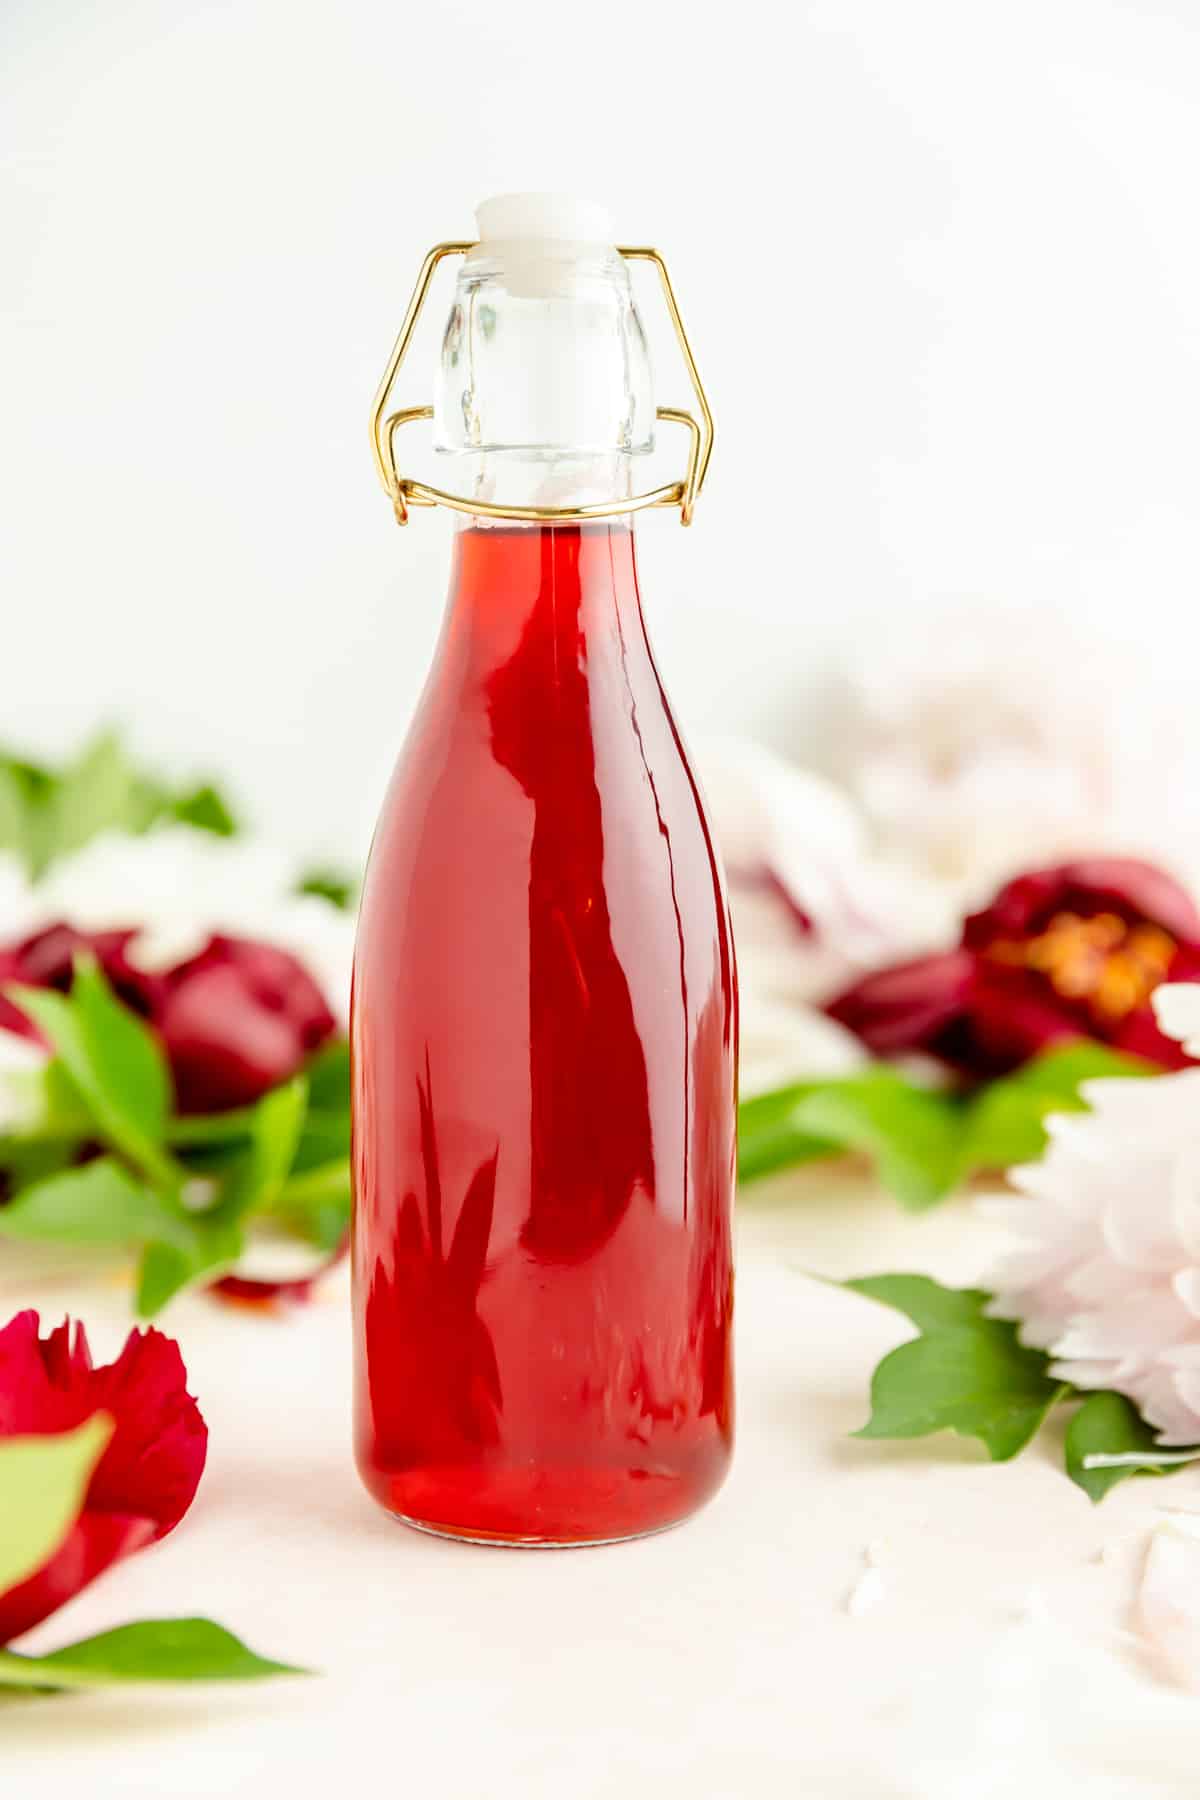 Close-up of red strawberry syrup in glass bottle with flowers on a white table.